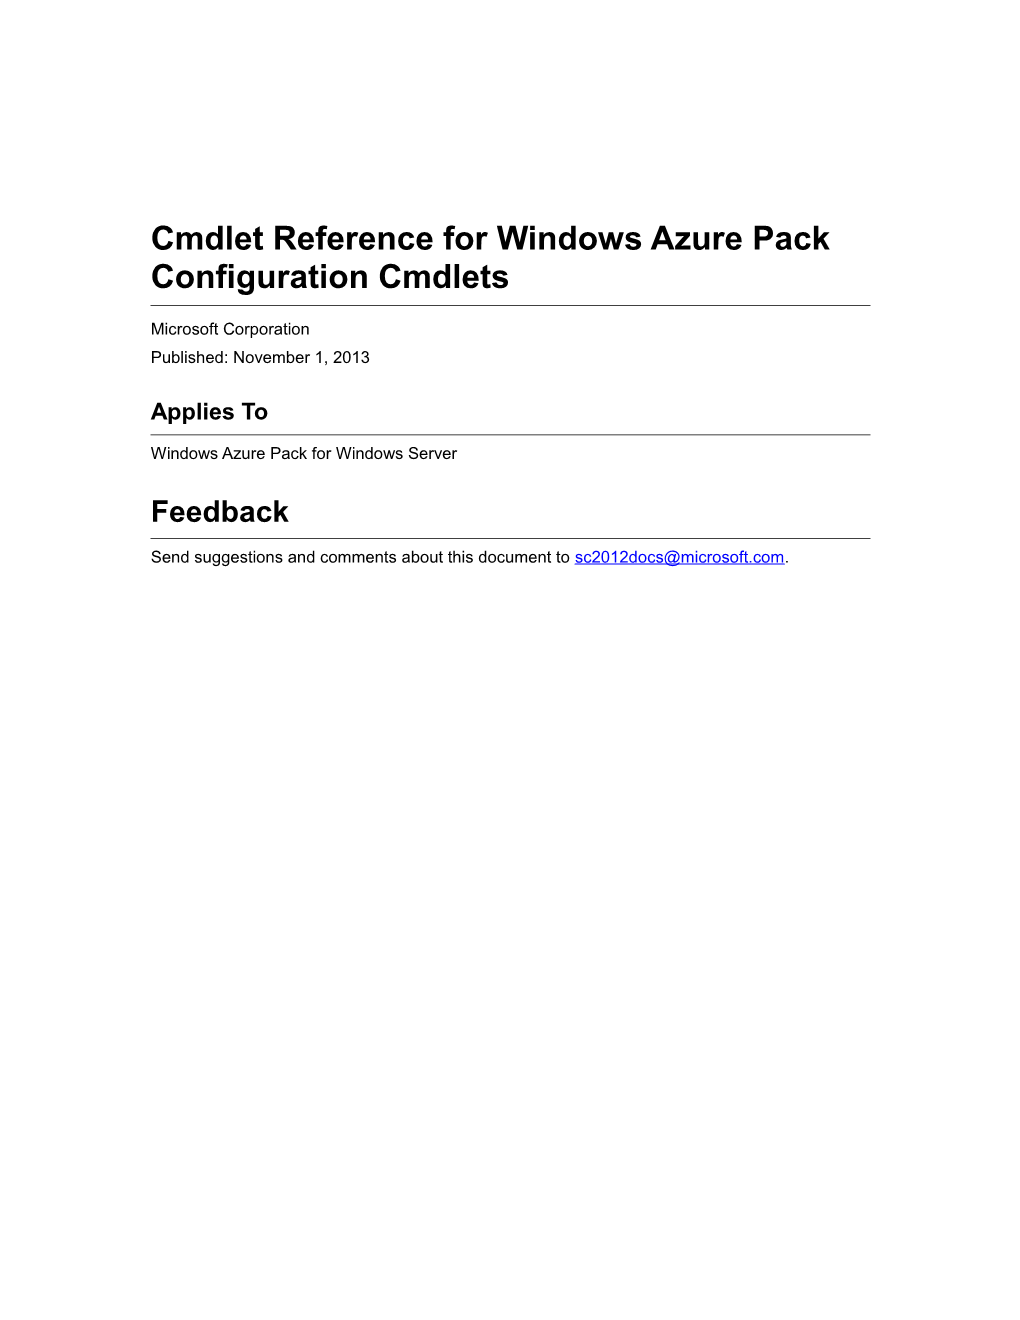 Cmdlet Reference for Windows Azure Pack Configuration Cmdlets